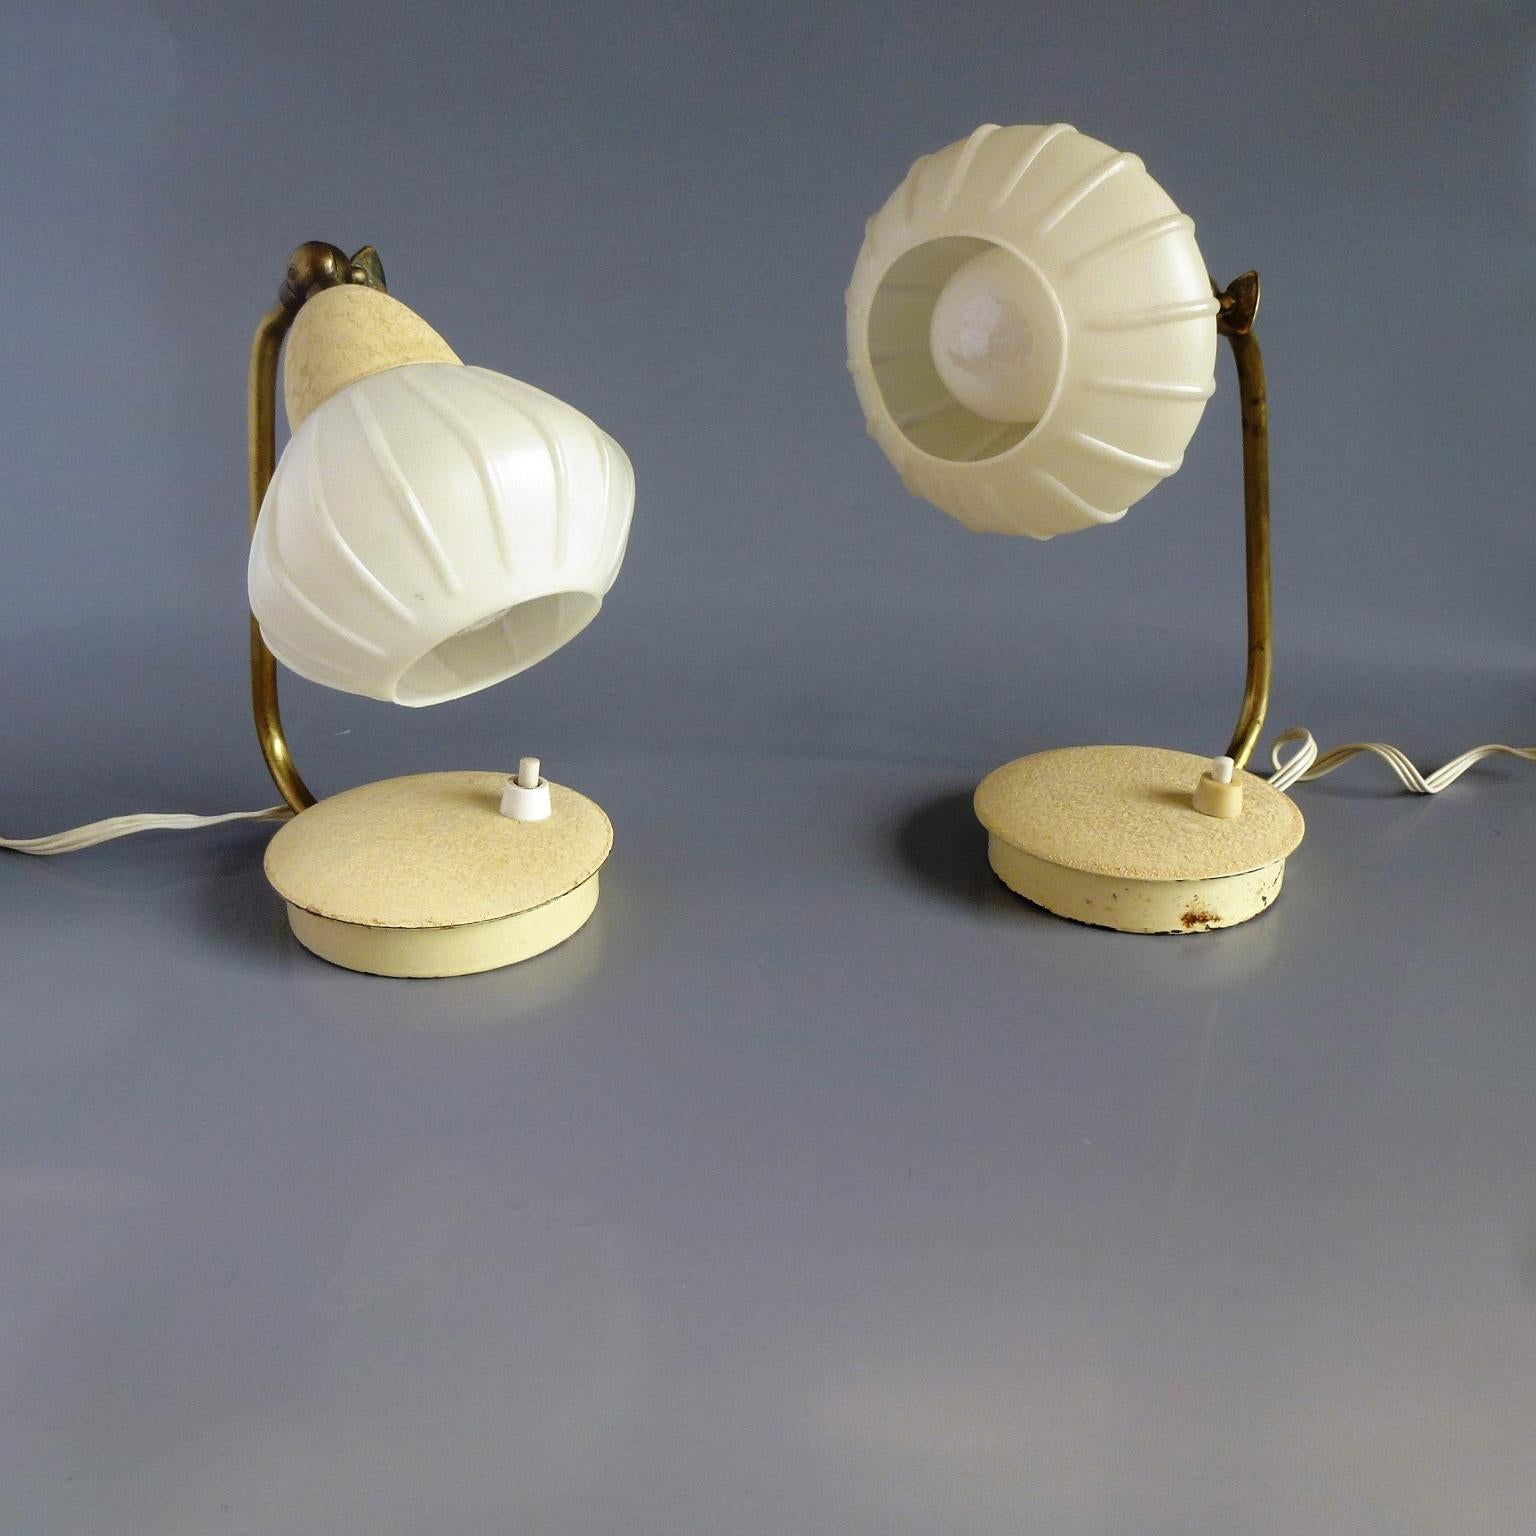 Hungarian Set of Two Small Cocoon Side Table Lamps from Szarvasi, Hungary, 1960s For Sale